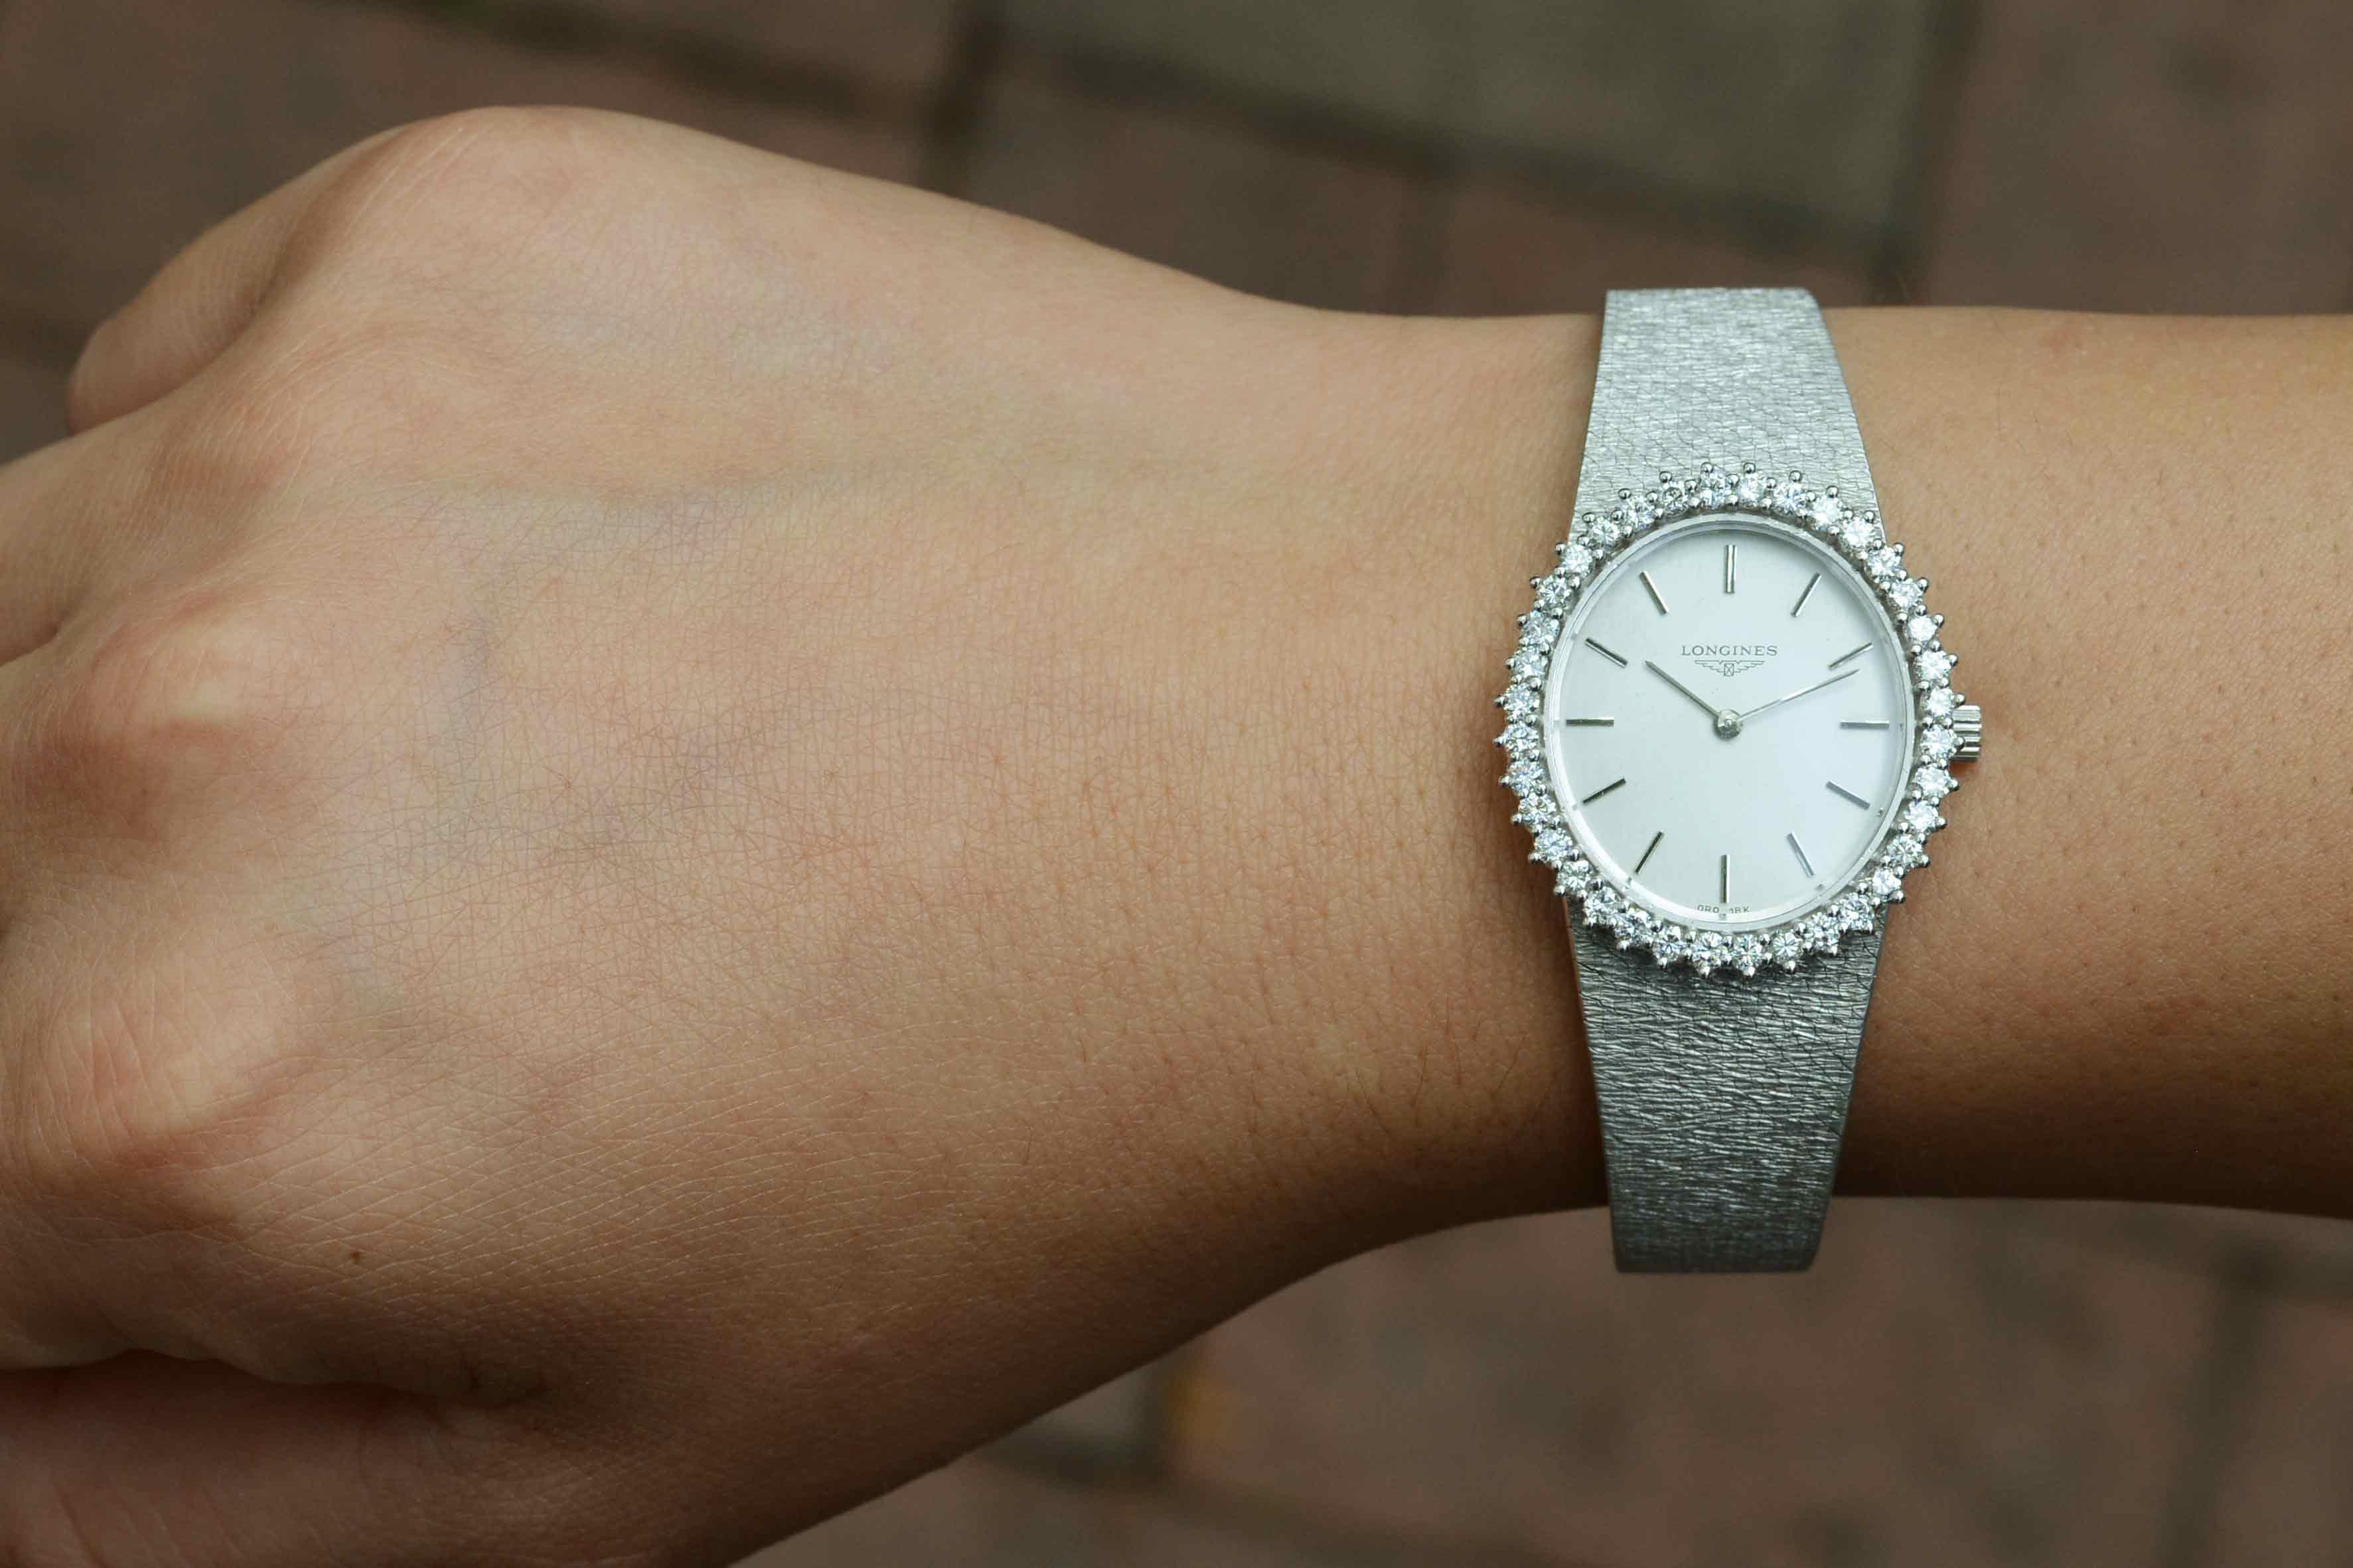 An unusual vintage ladies' Longines cocktail dress watch. The 18K white gold bracelet and oval dial adorned with 36 dazzling diamonds totaling 1 carat. A very pretty and infinitely fashionable addition to your collection of jewelry and